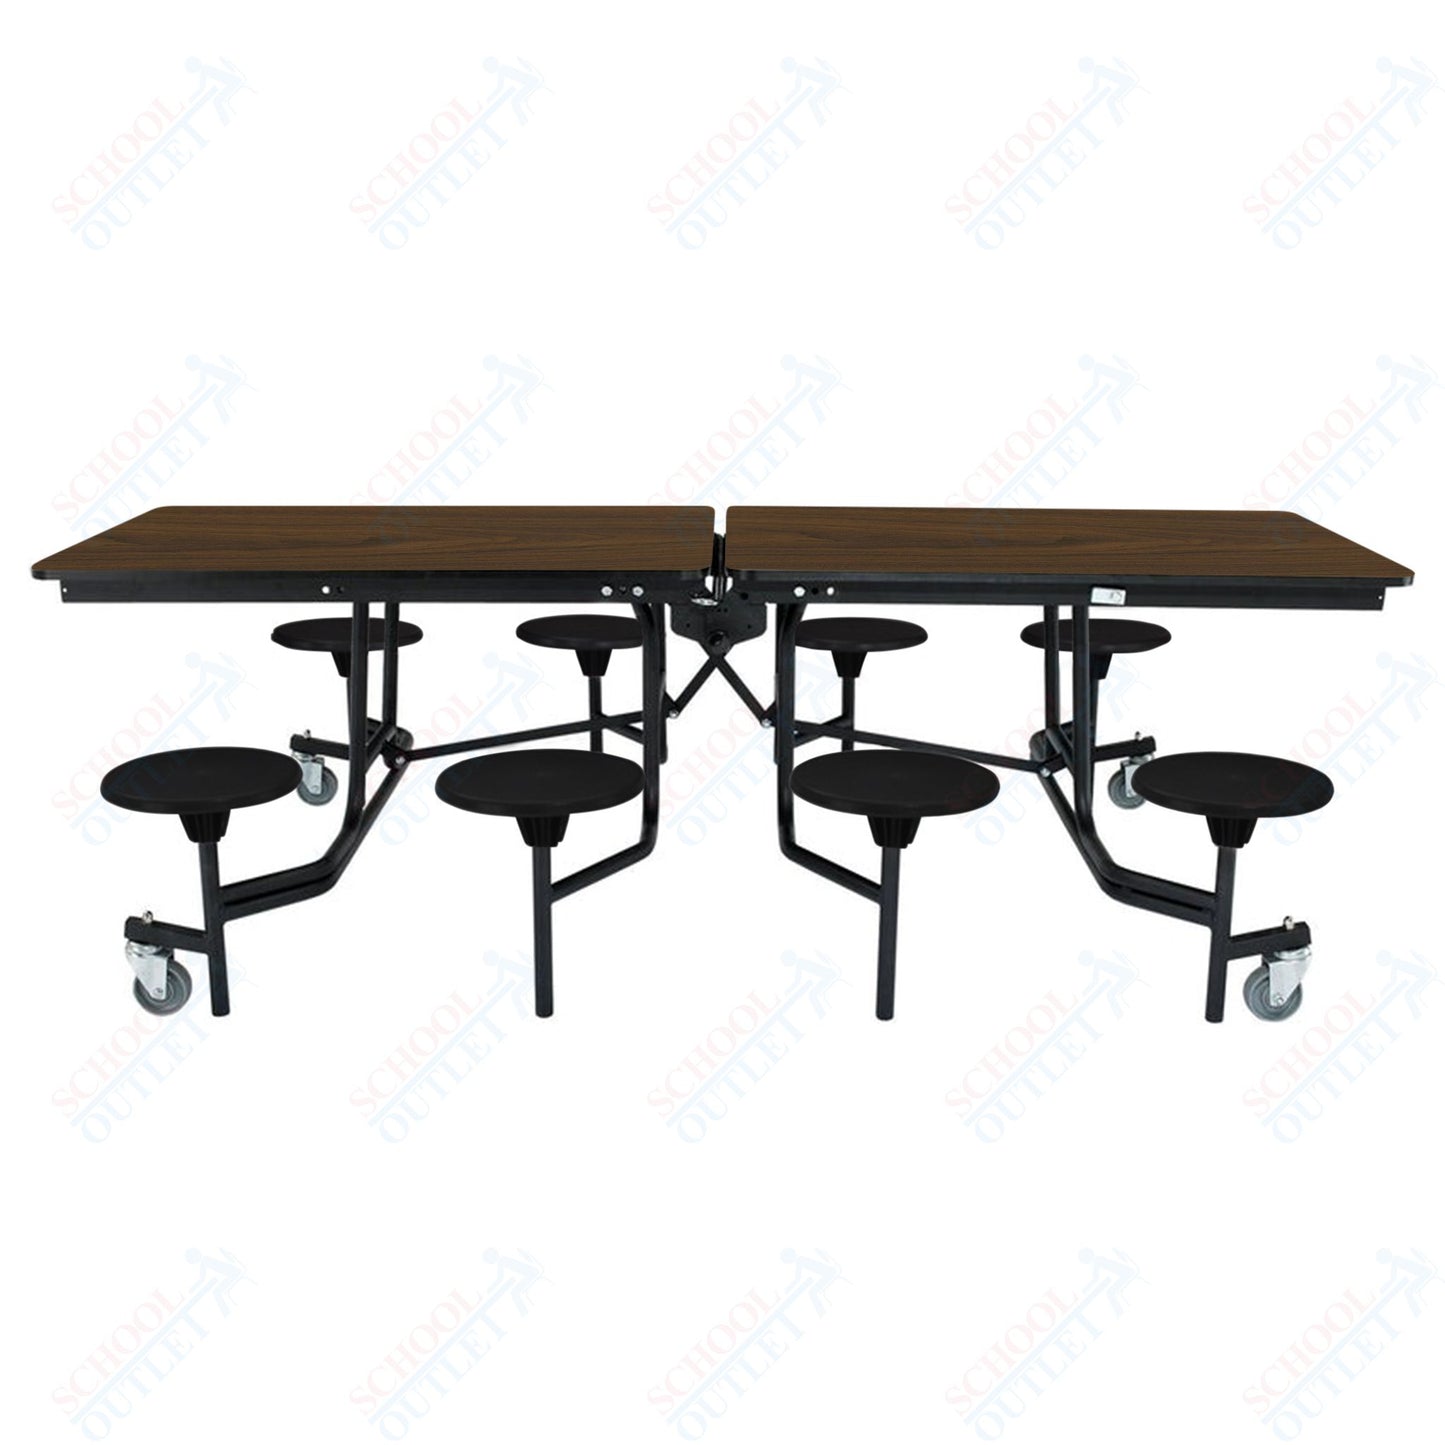 NPS Mobile Cafeteria Table - 30" W x 8' L - 8 Stools - Particleboard Core - T-Molding Edge - Black Powdercoated Frame